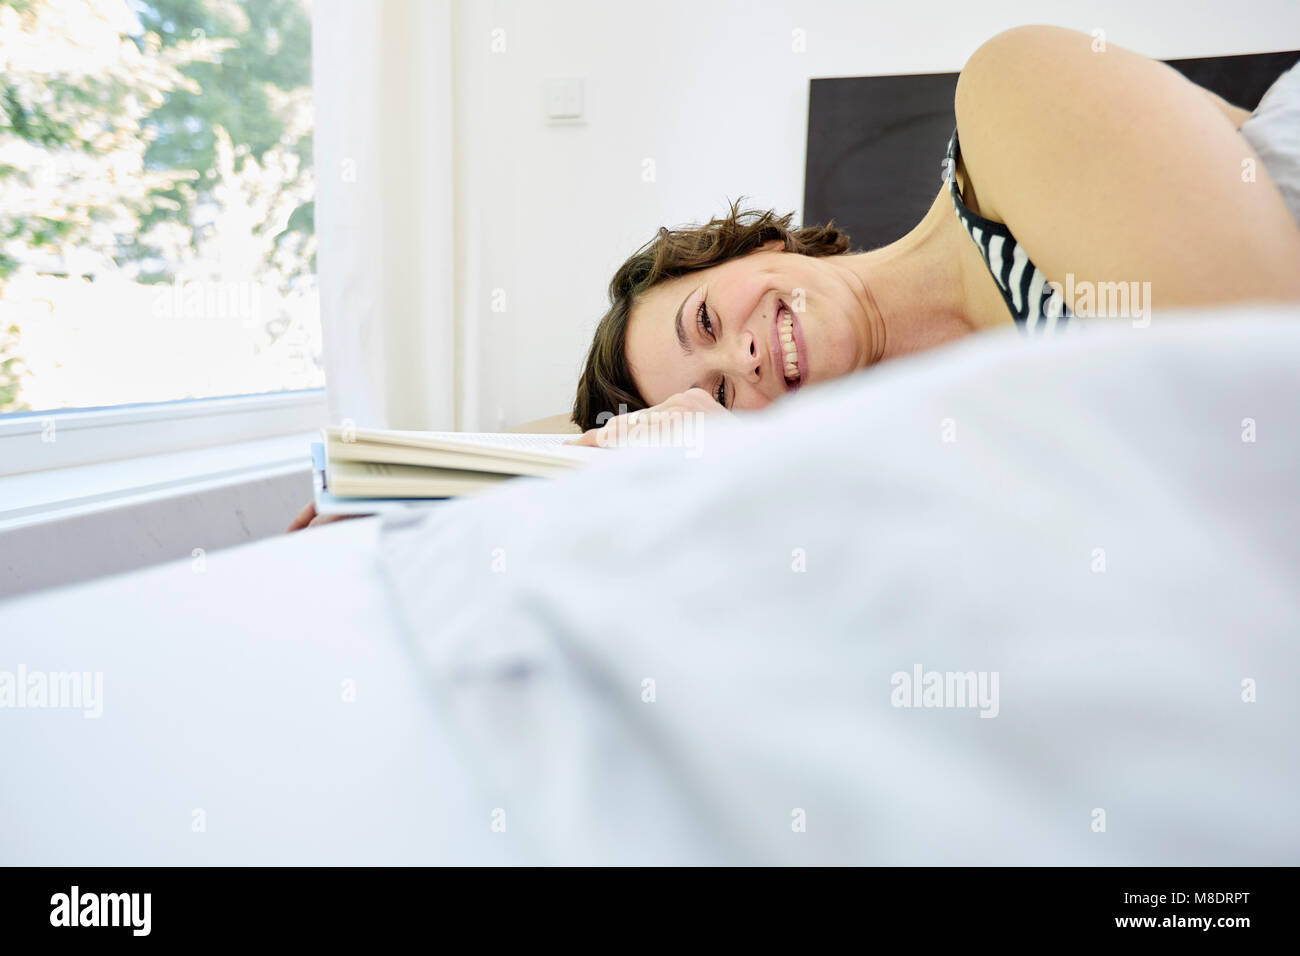 Mid adult woman, relaxing on bed, holding book, smiling Stock Photo